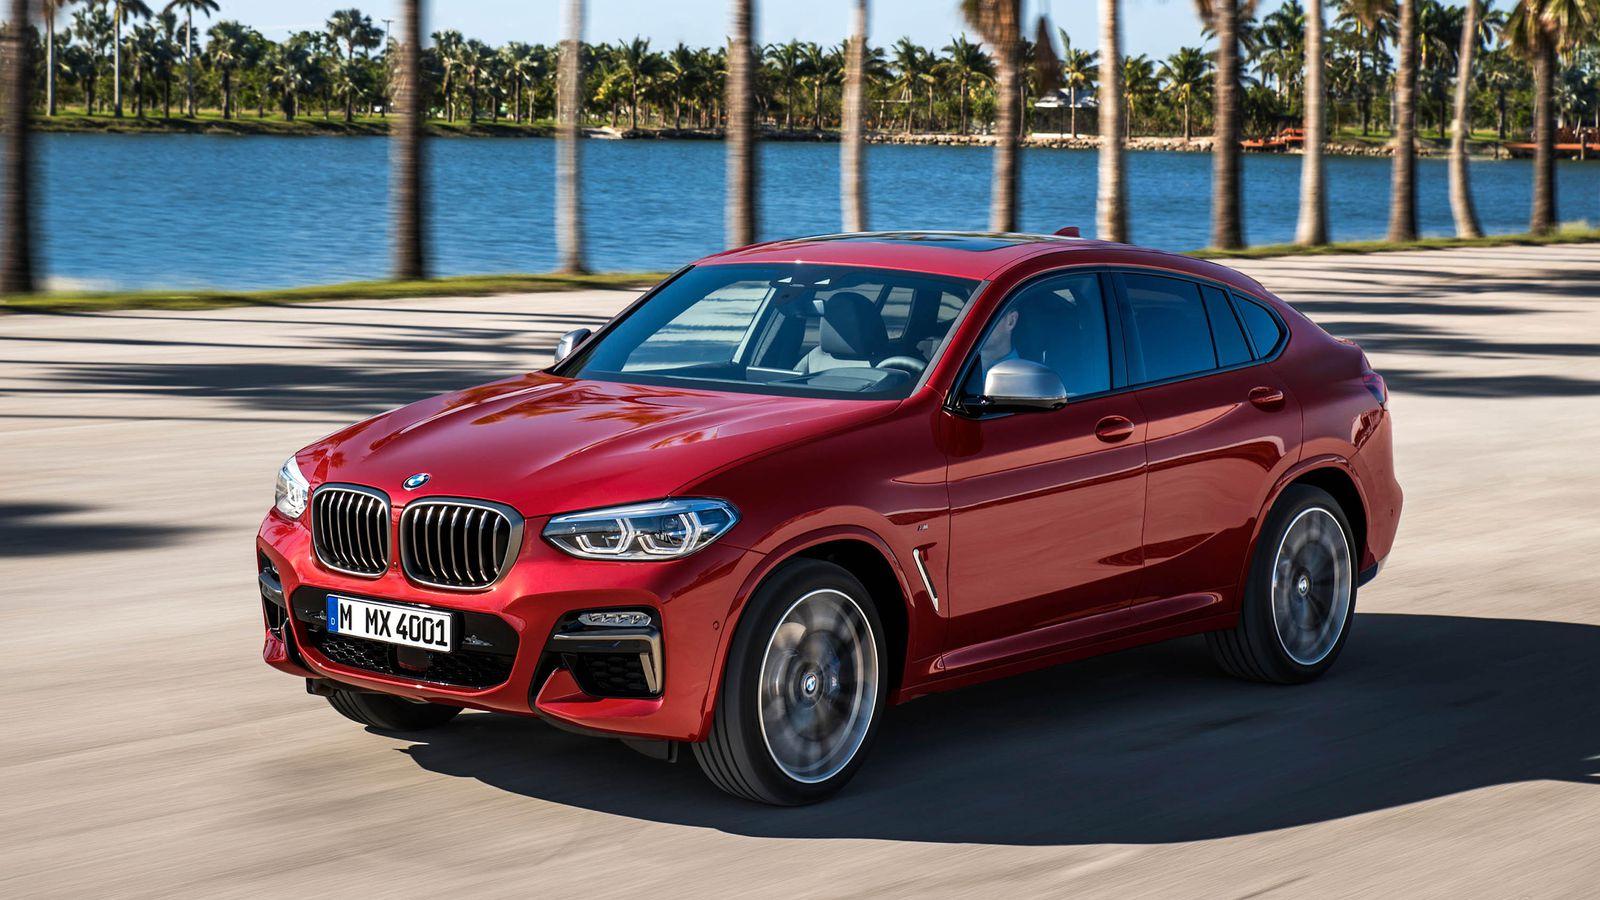 BMW X4 arrives in July, priced from $450